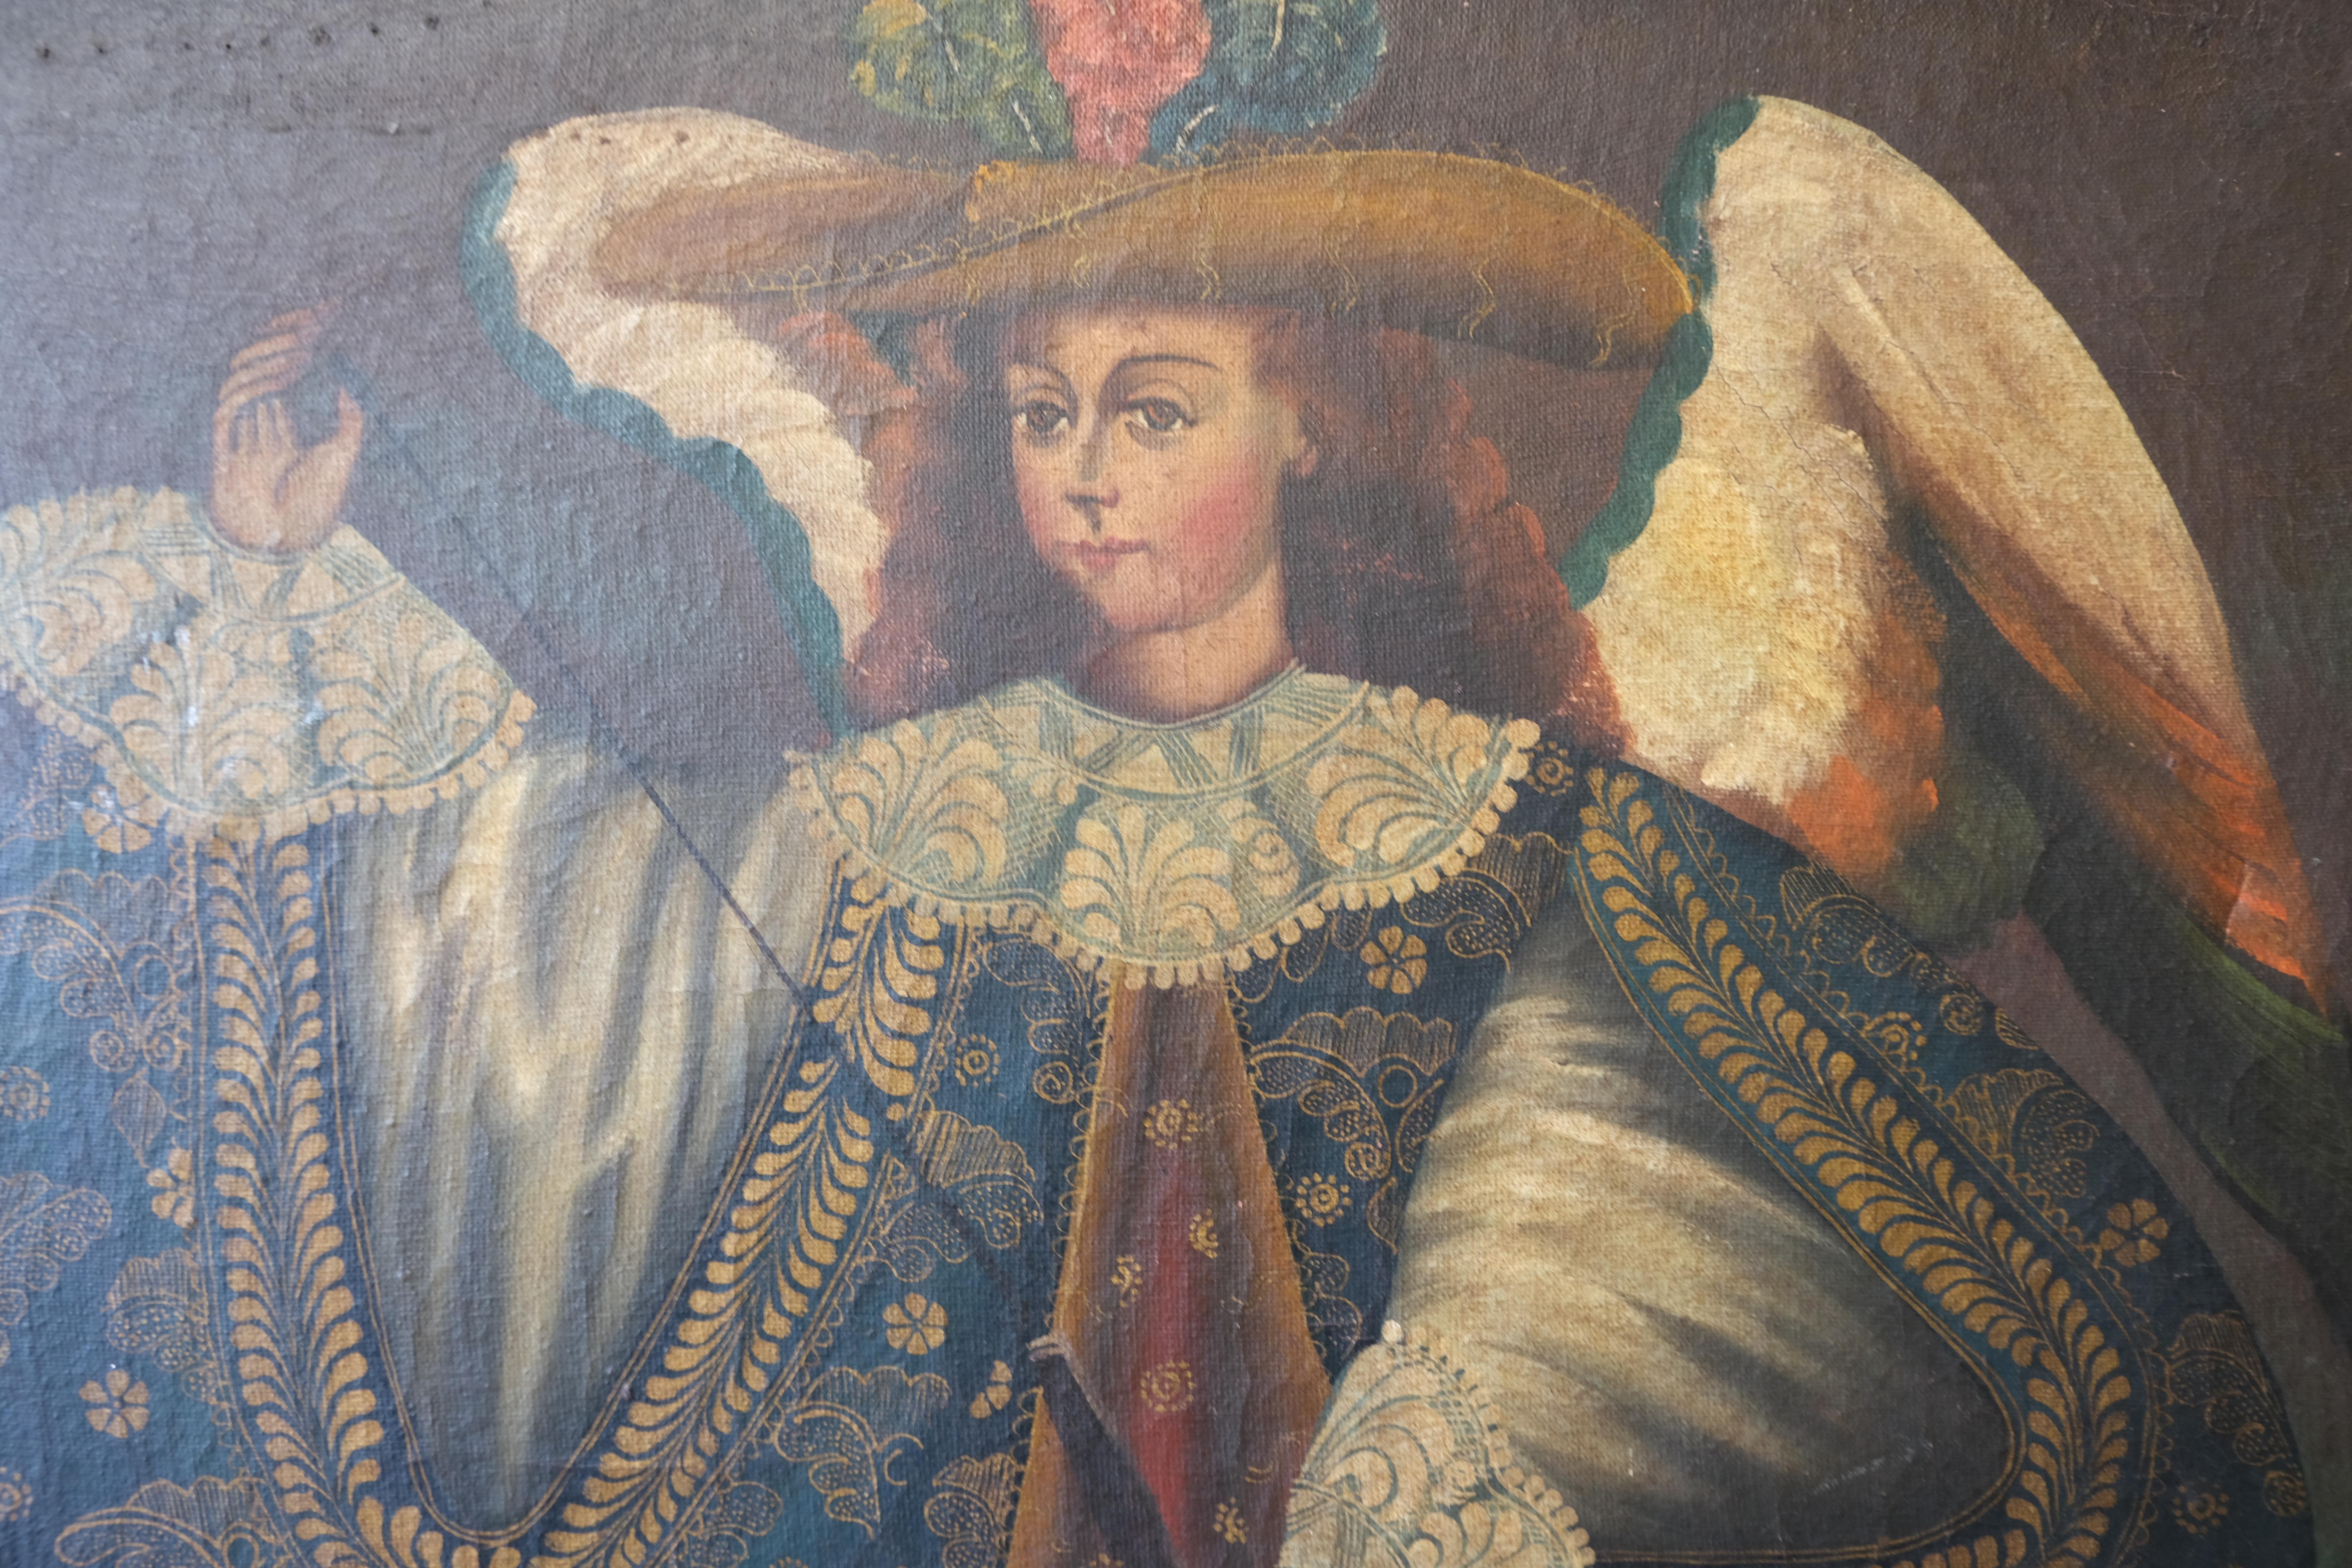 Hutton-Clarke Antiques is pleased to Present a unique 20th-century oil painting, this piece is a remarkable blend of the naive art style with distinct Latin American influences. The central figure, depicted with an air of nobility and an intriguing